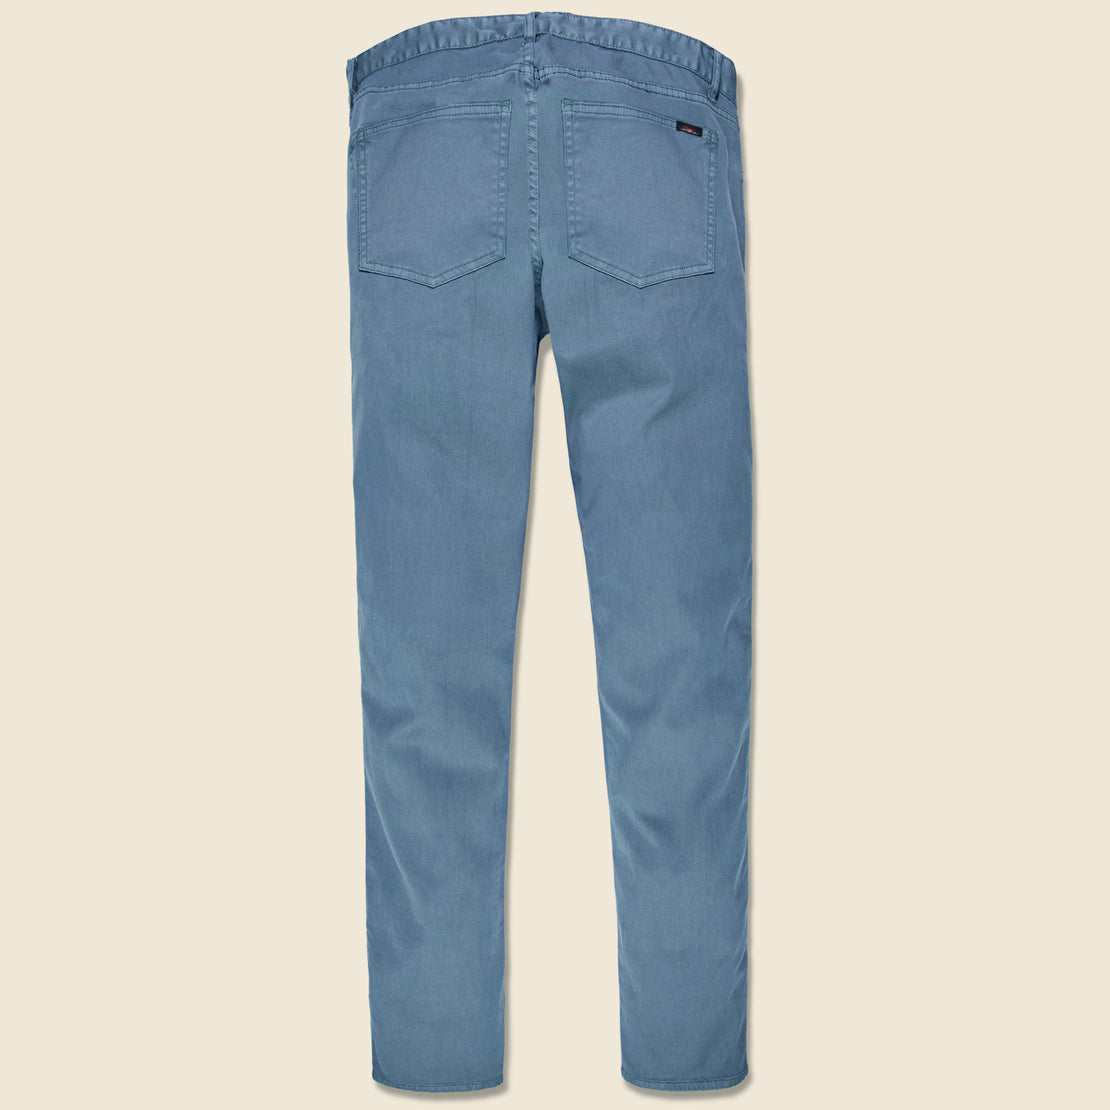 Comfort Twill Jean - Washed Blue - Faherty - STAG Provisions - Pants - Twill